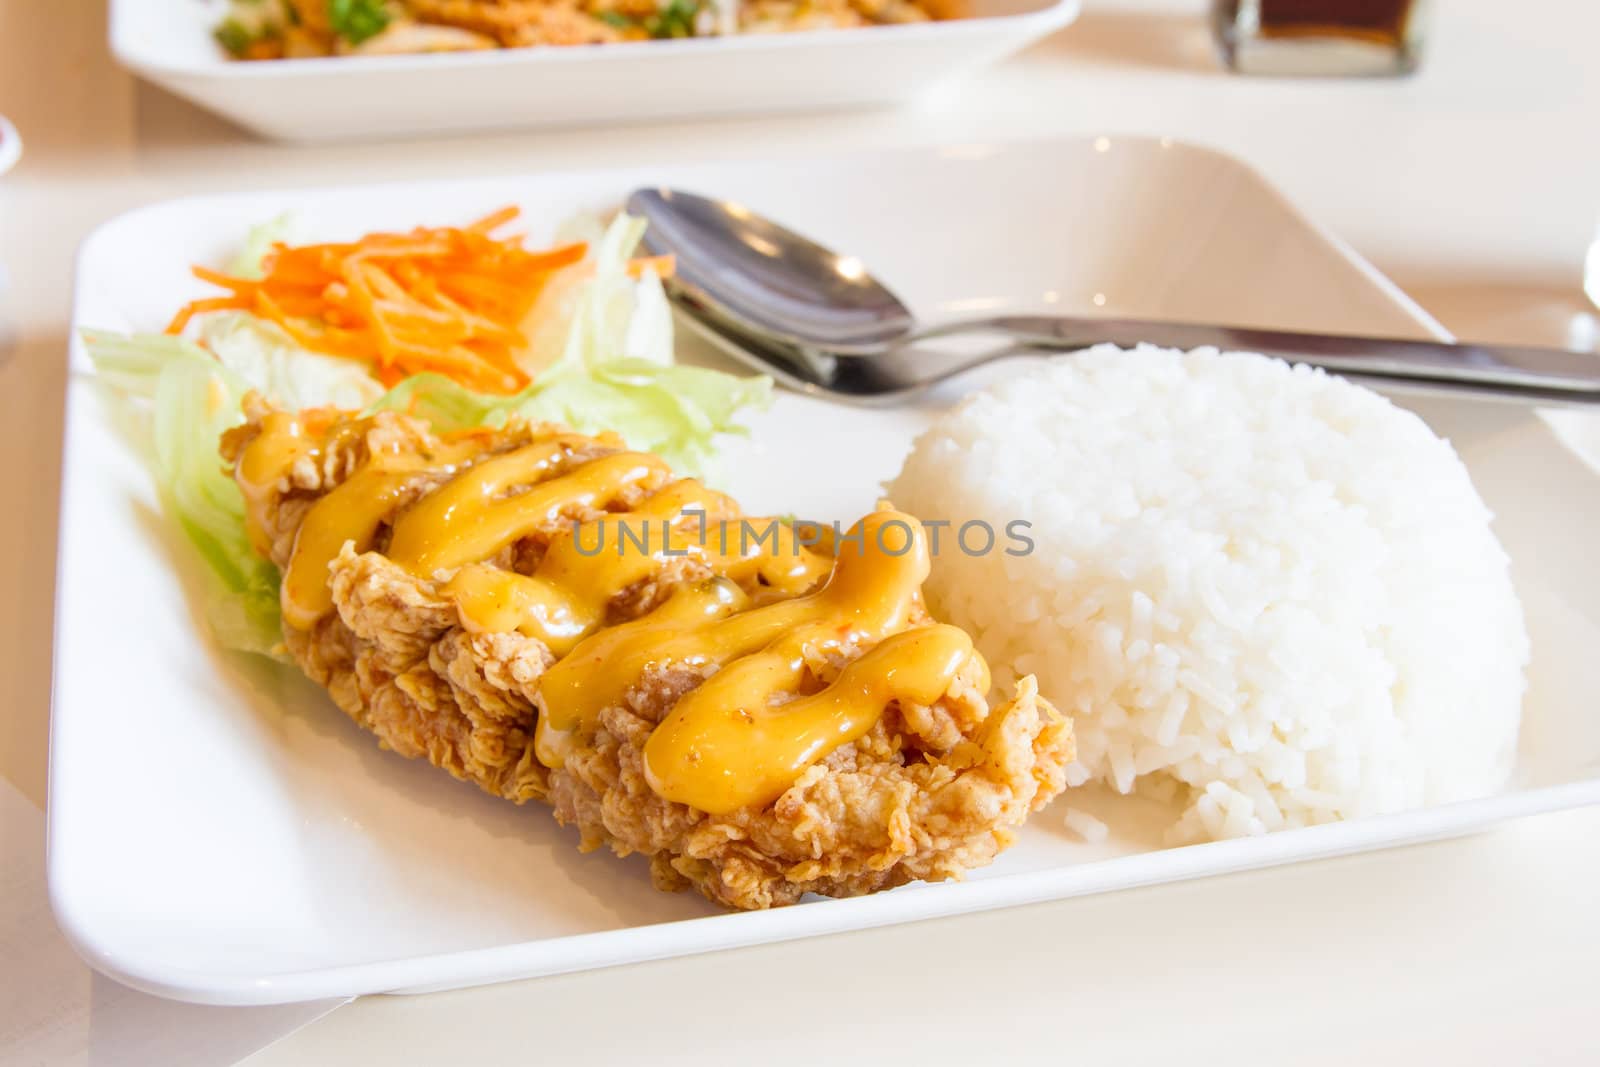 Fried chicken with rice by kasinv